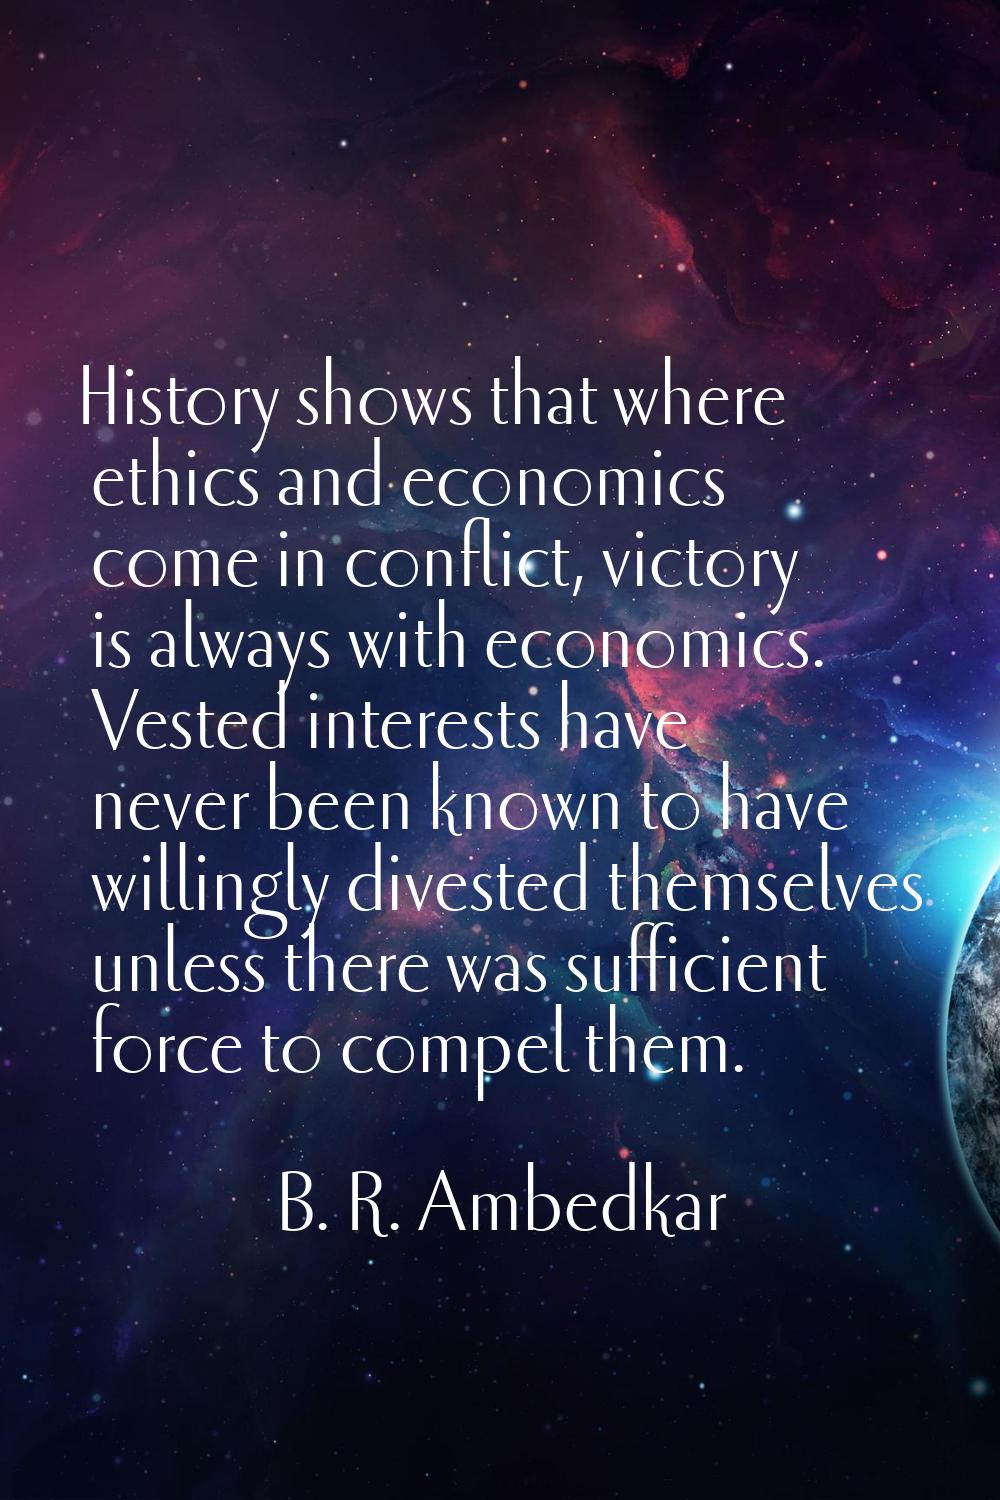 History shows that where ethics and economics come in conflict, victory is always with economics. V